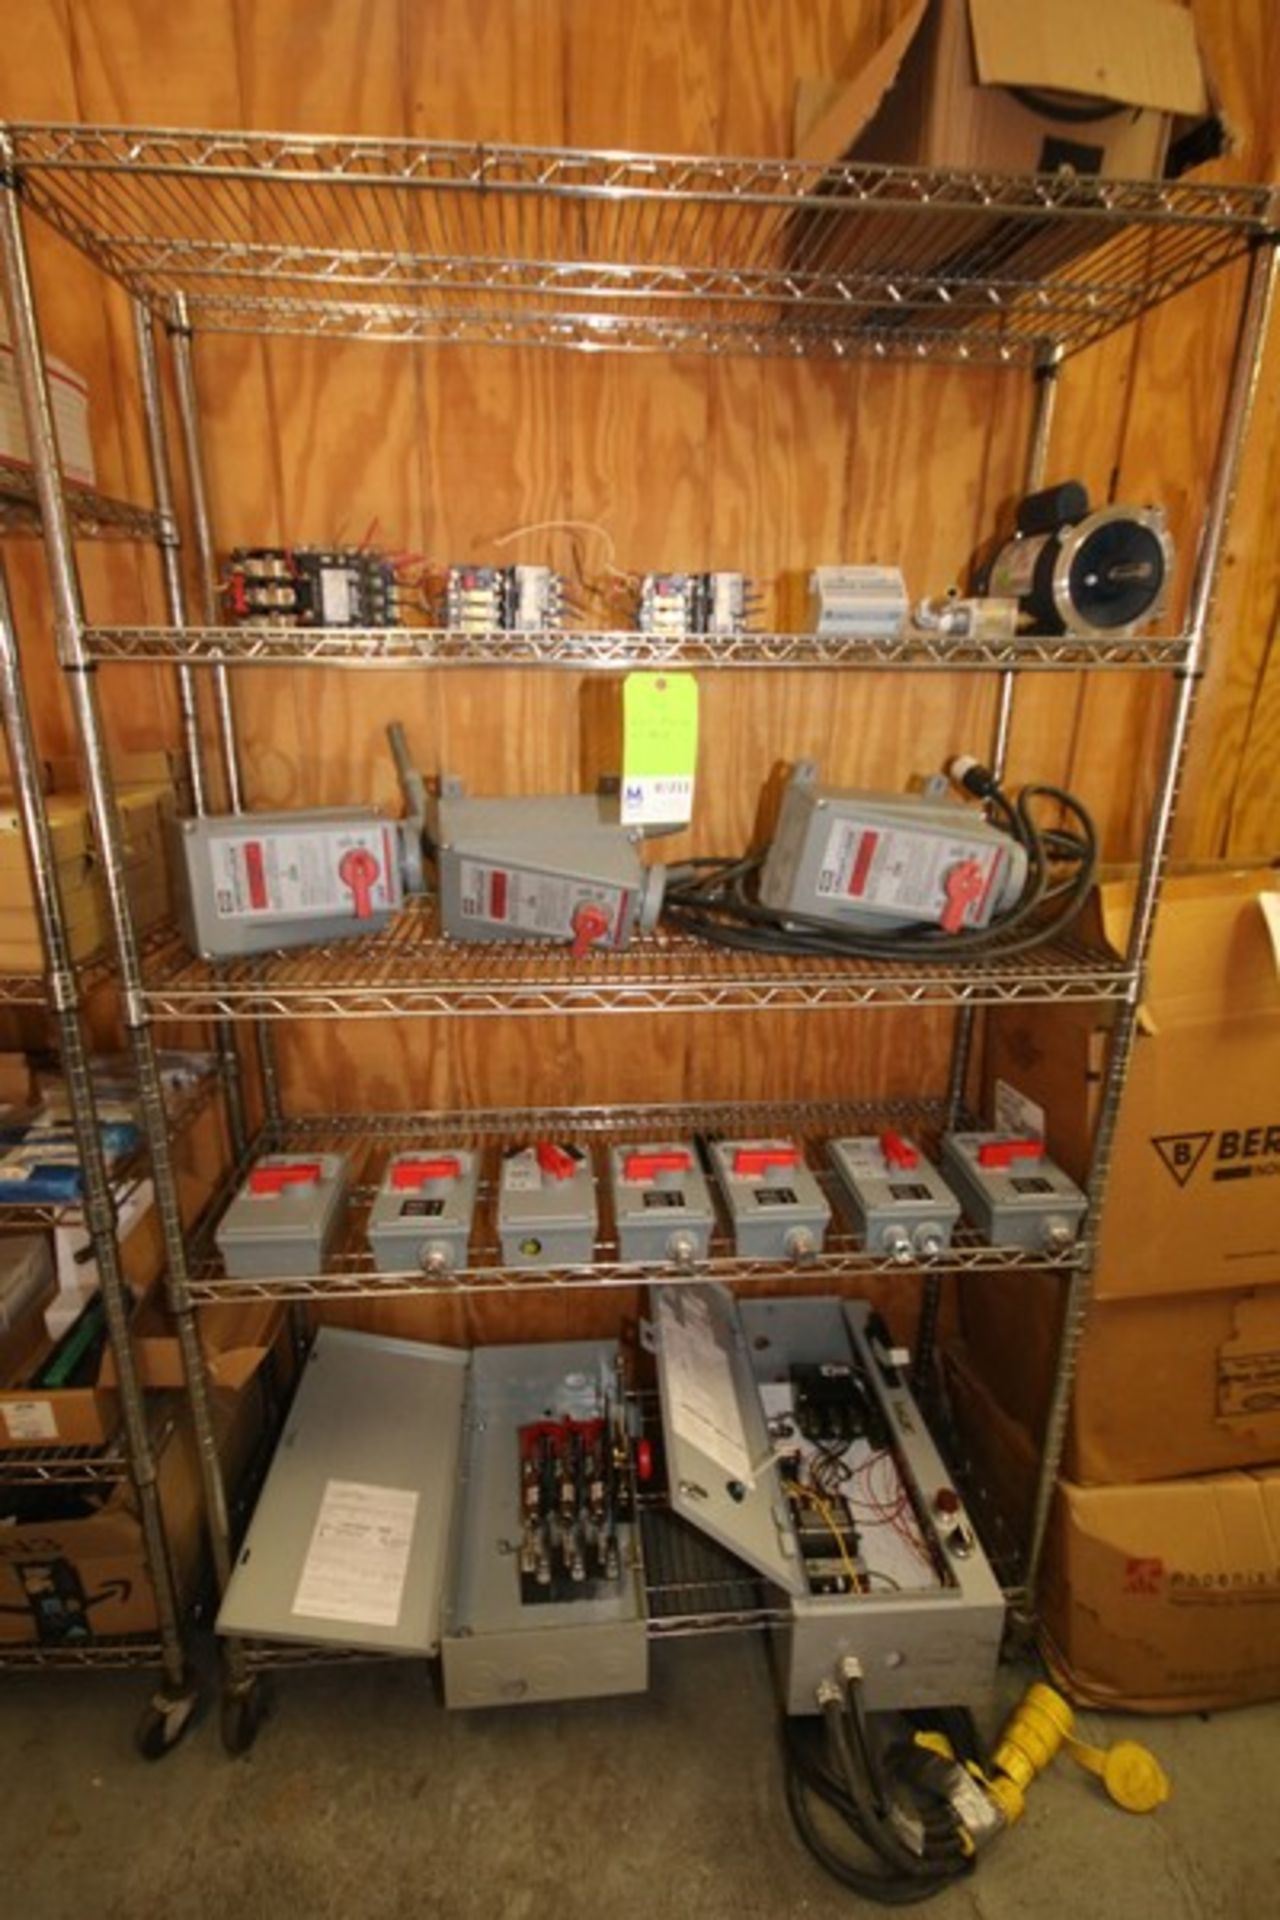 Assortment of Electrical on Rack Includes Starter Control Box with Siemens 3/5 hp Starter Cat. No.